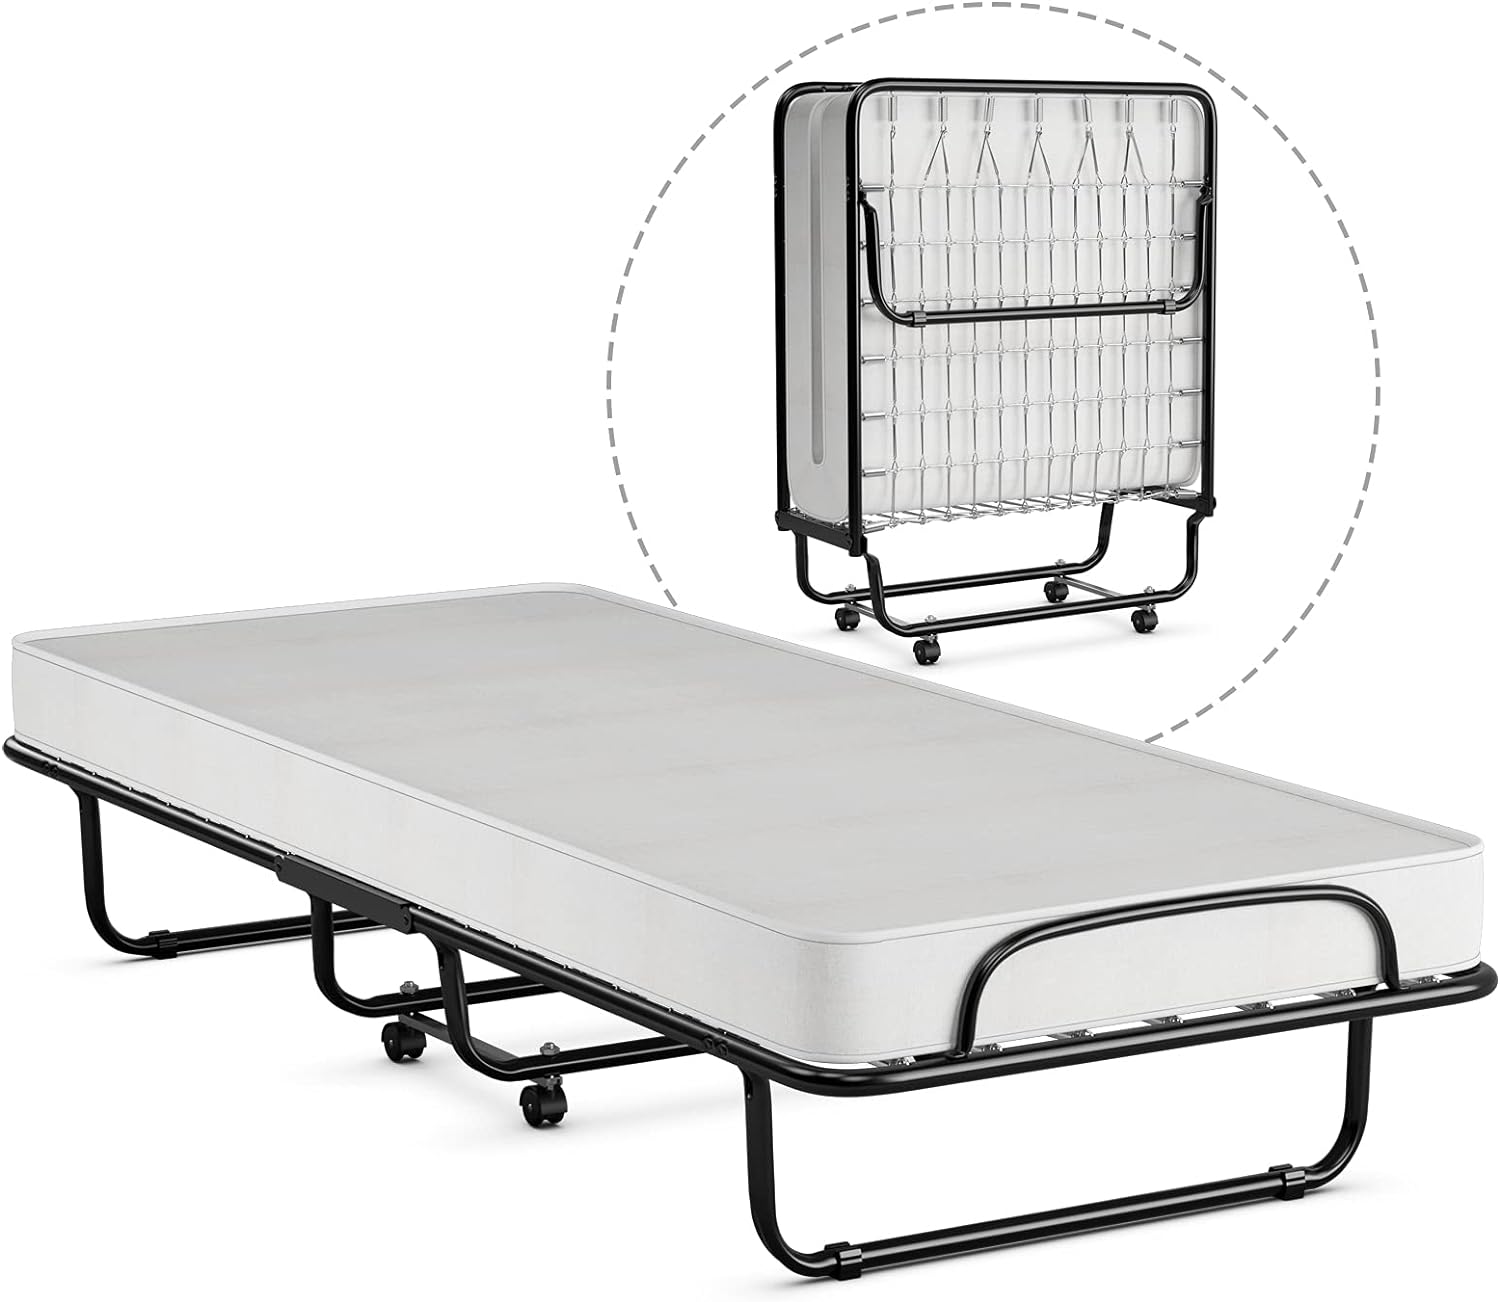 GOFLAME Folding Bed with Memory Foam Mattress, Portable Bed Cot Size with Metal Frame and Wheels for Kids and Adults, Rollaway Guest Bed for Home and Office, Made in Italy